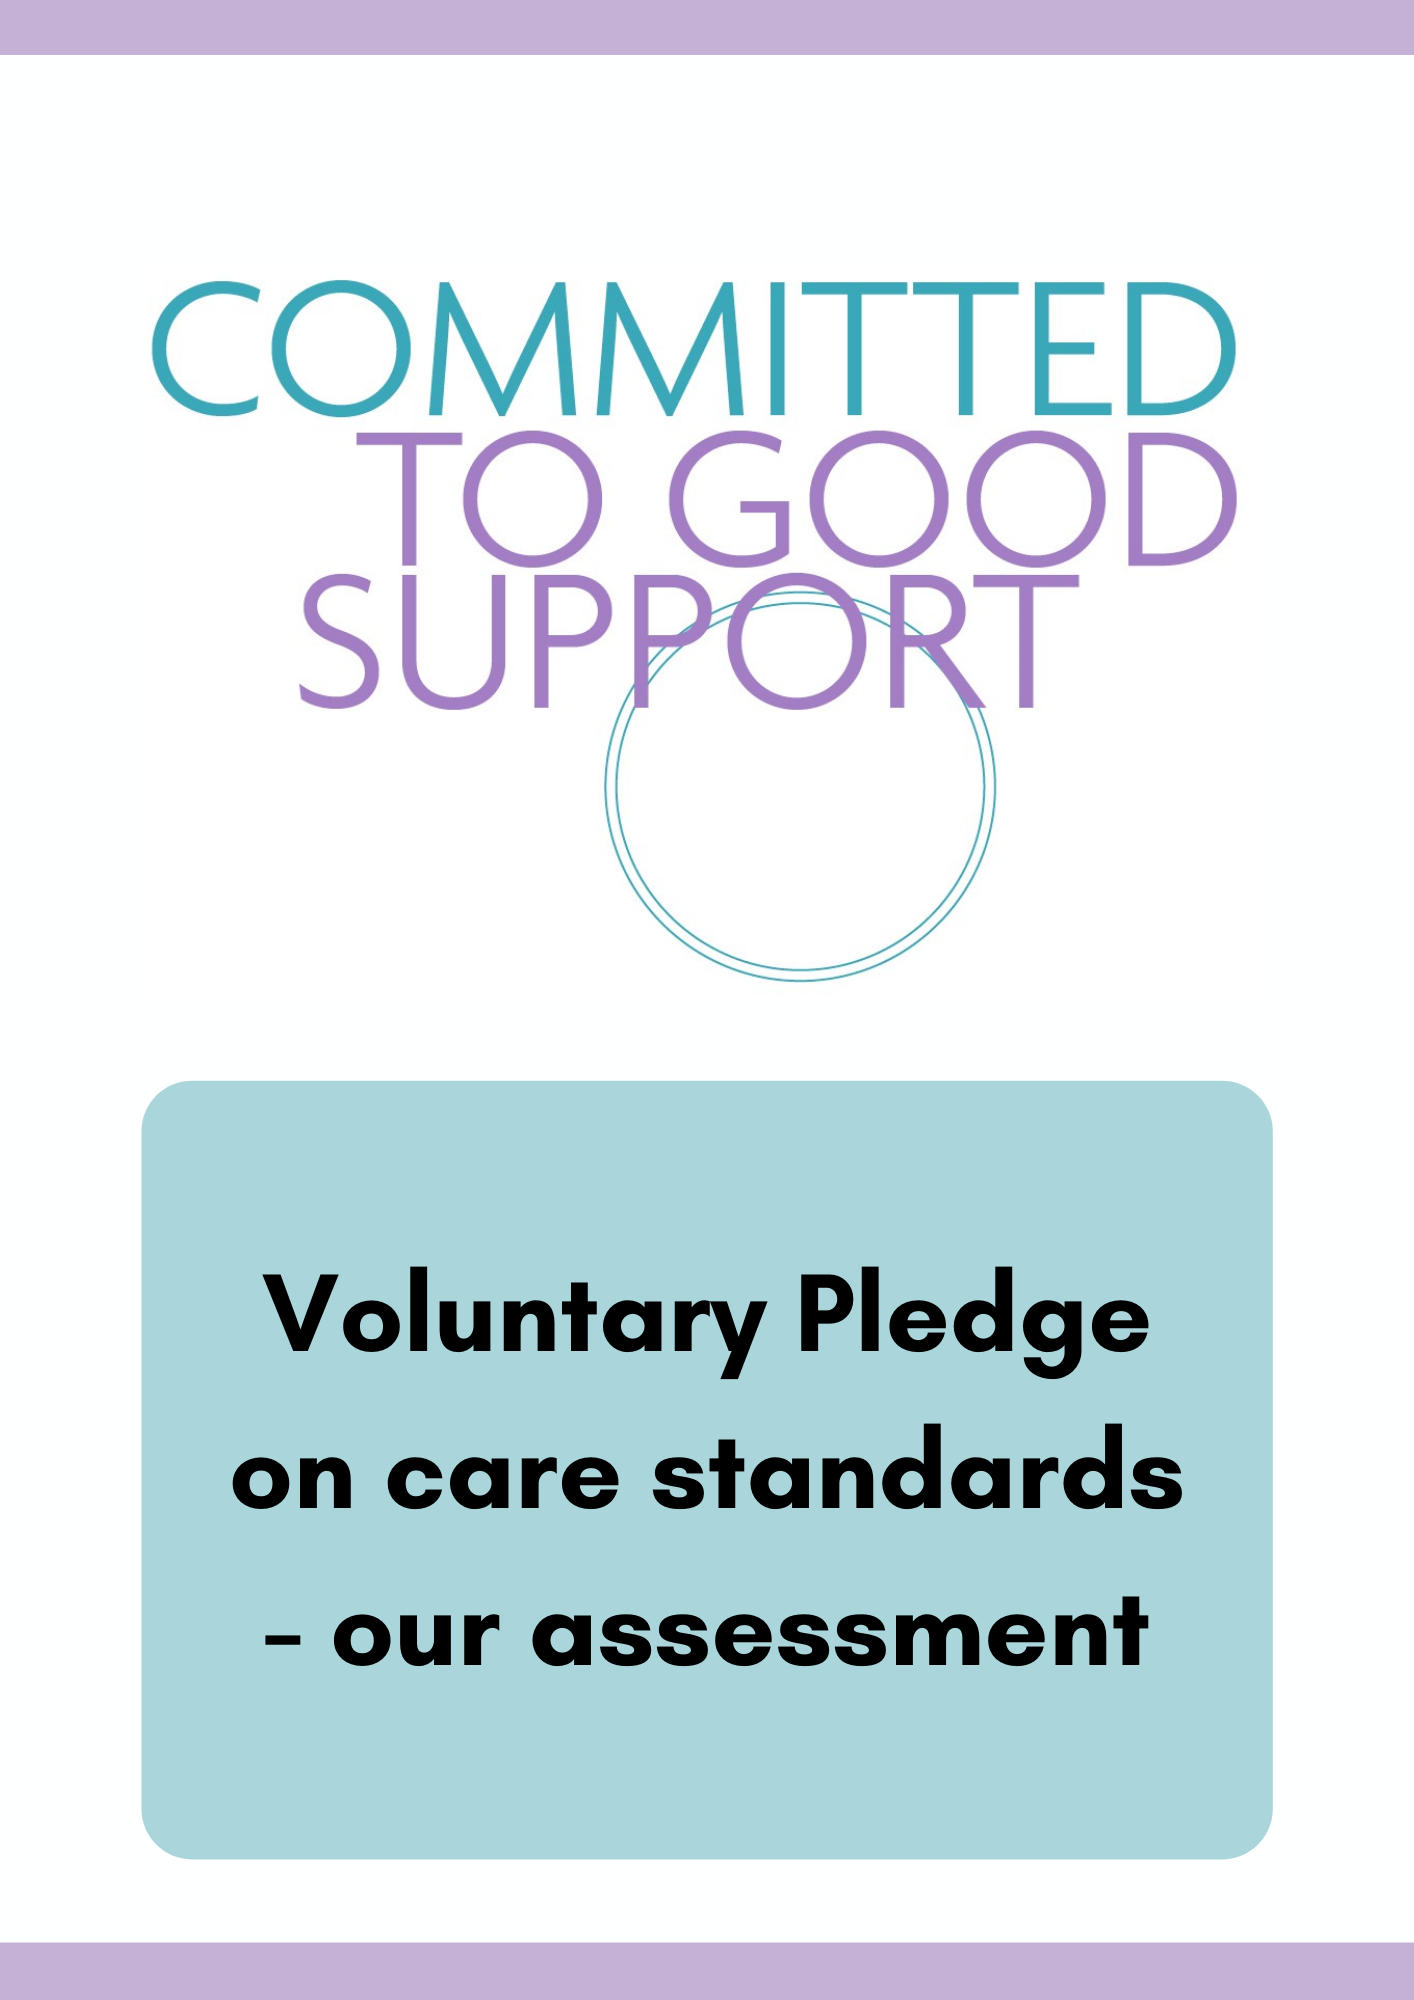 Committed to Good Support. Voluntary pledge on care standards - our assessment